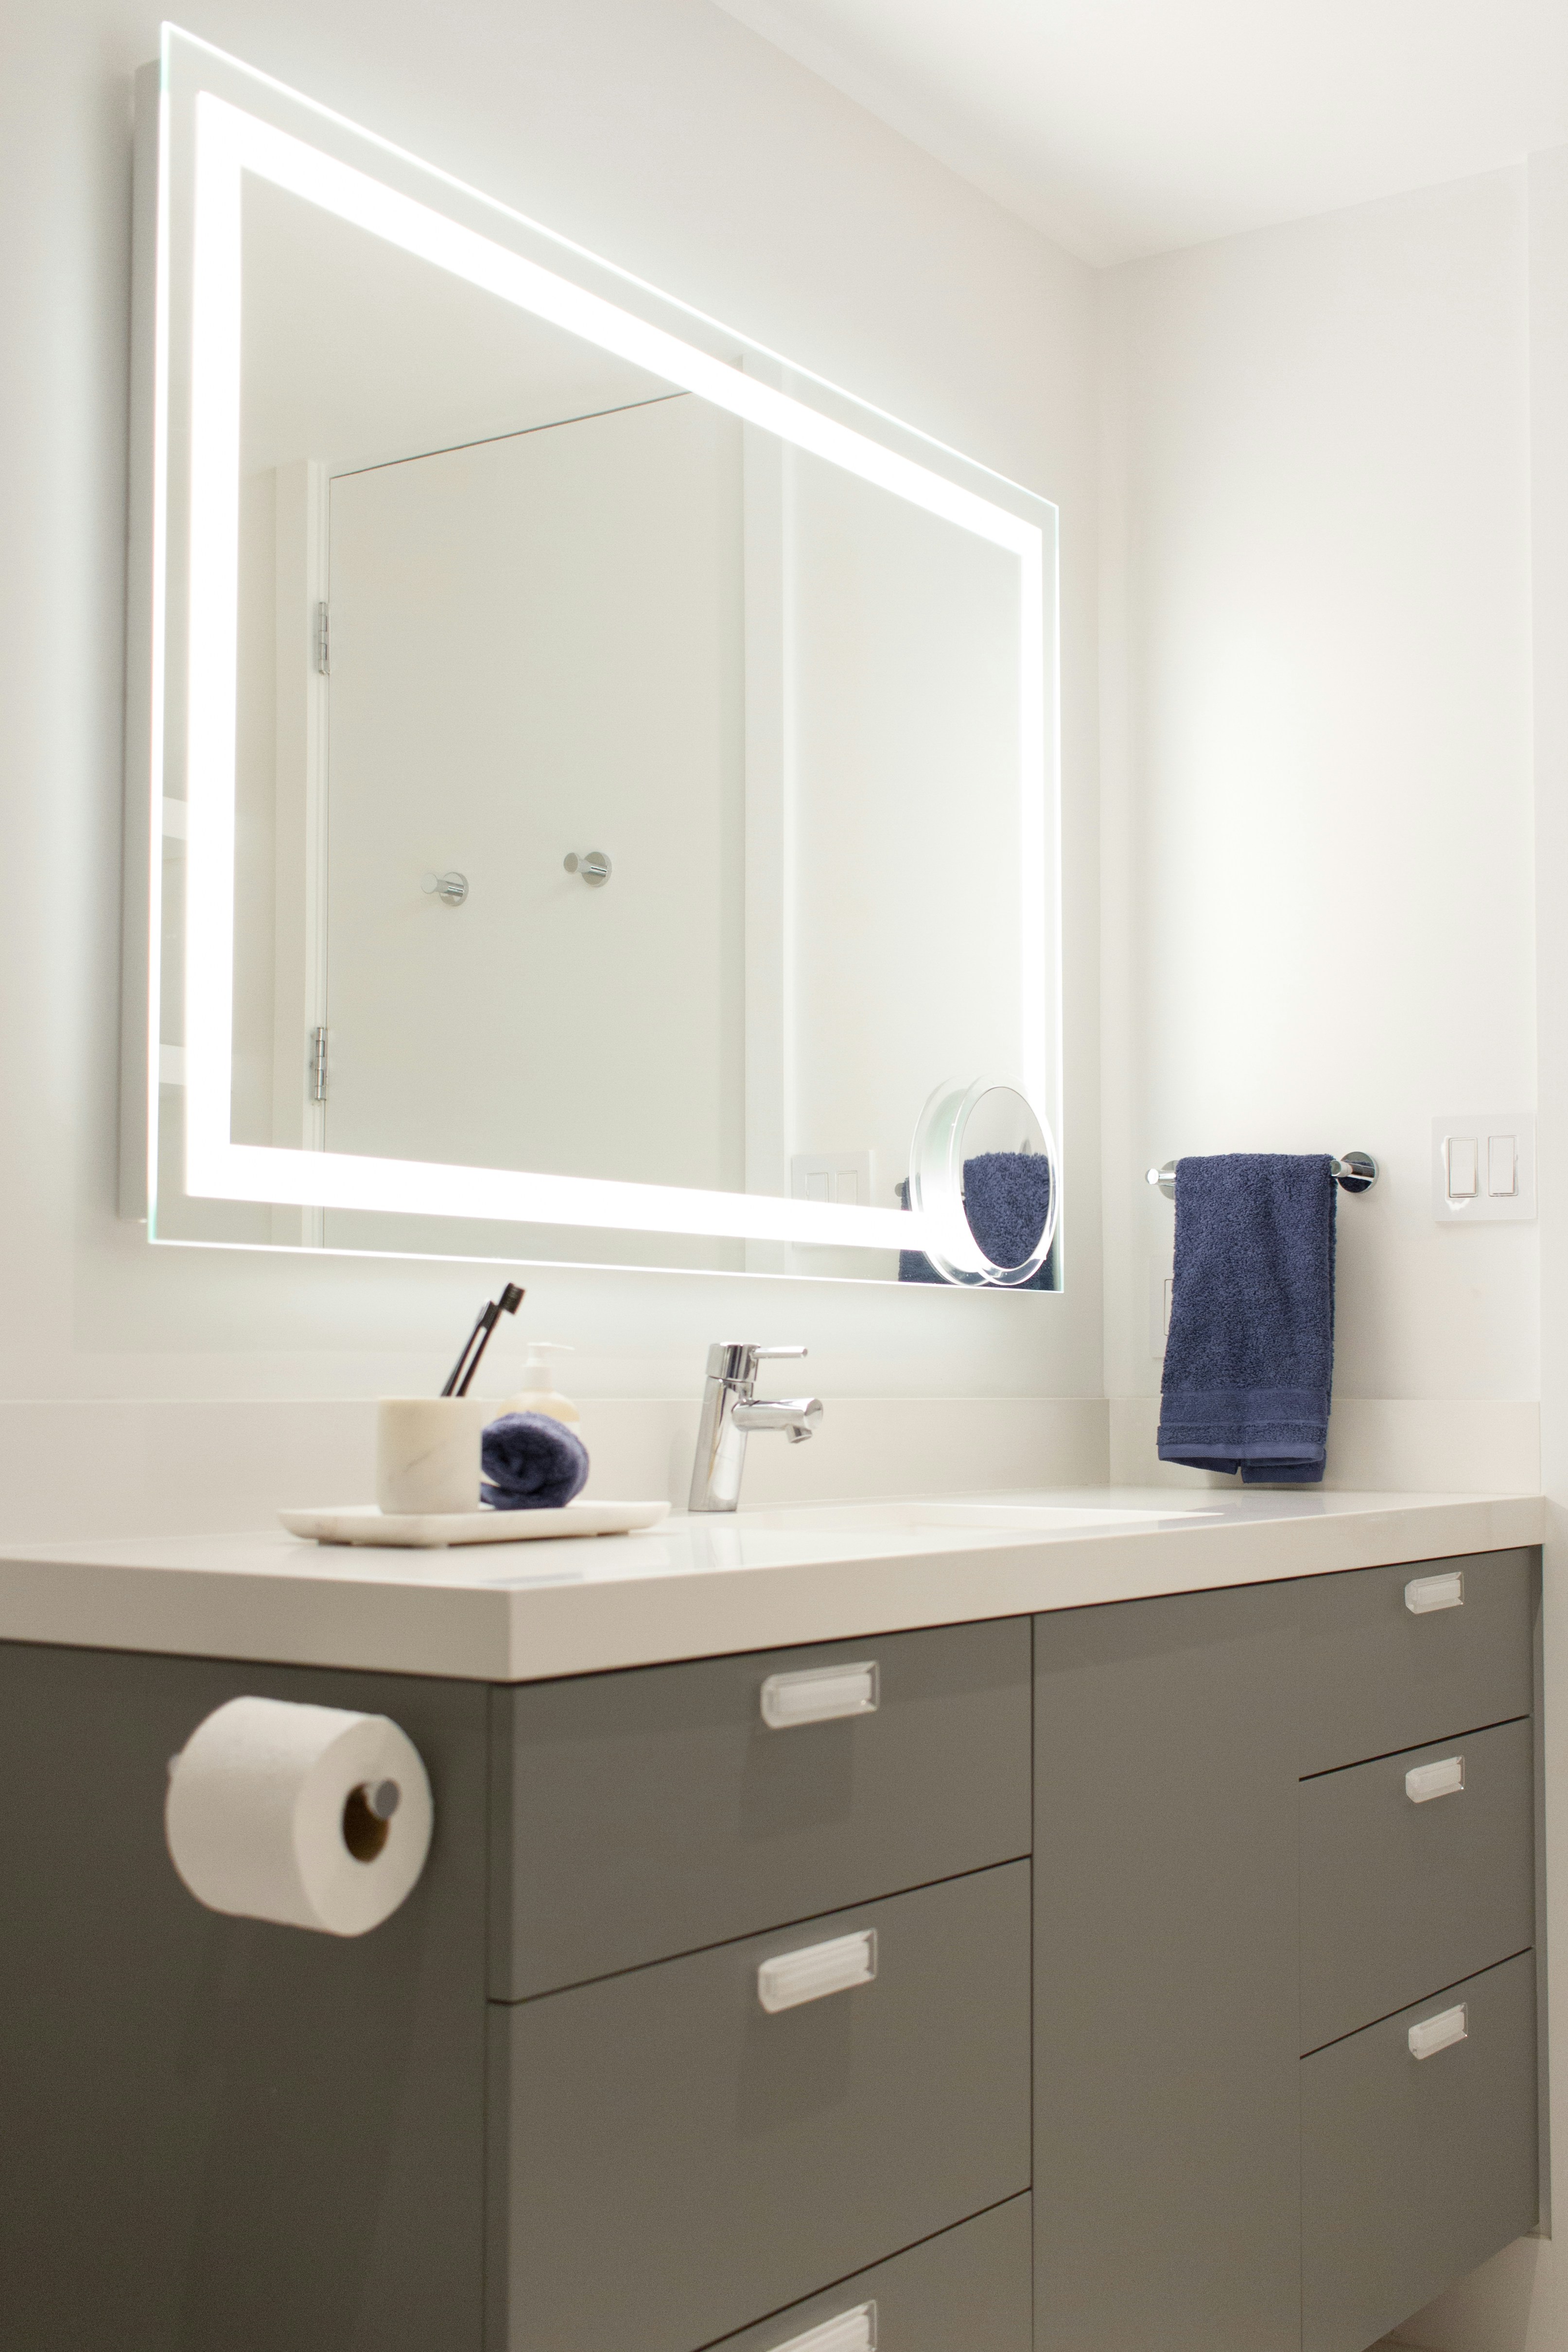 A pristine white bathroom featuring an illuminating mirror that enhances the ambiance. The towel and brush holders offer practicality while harmonizing with the overall aesthetic.